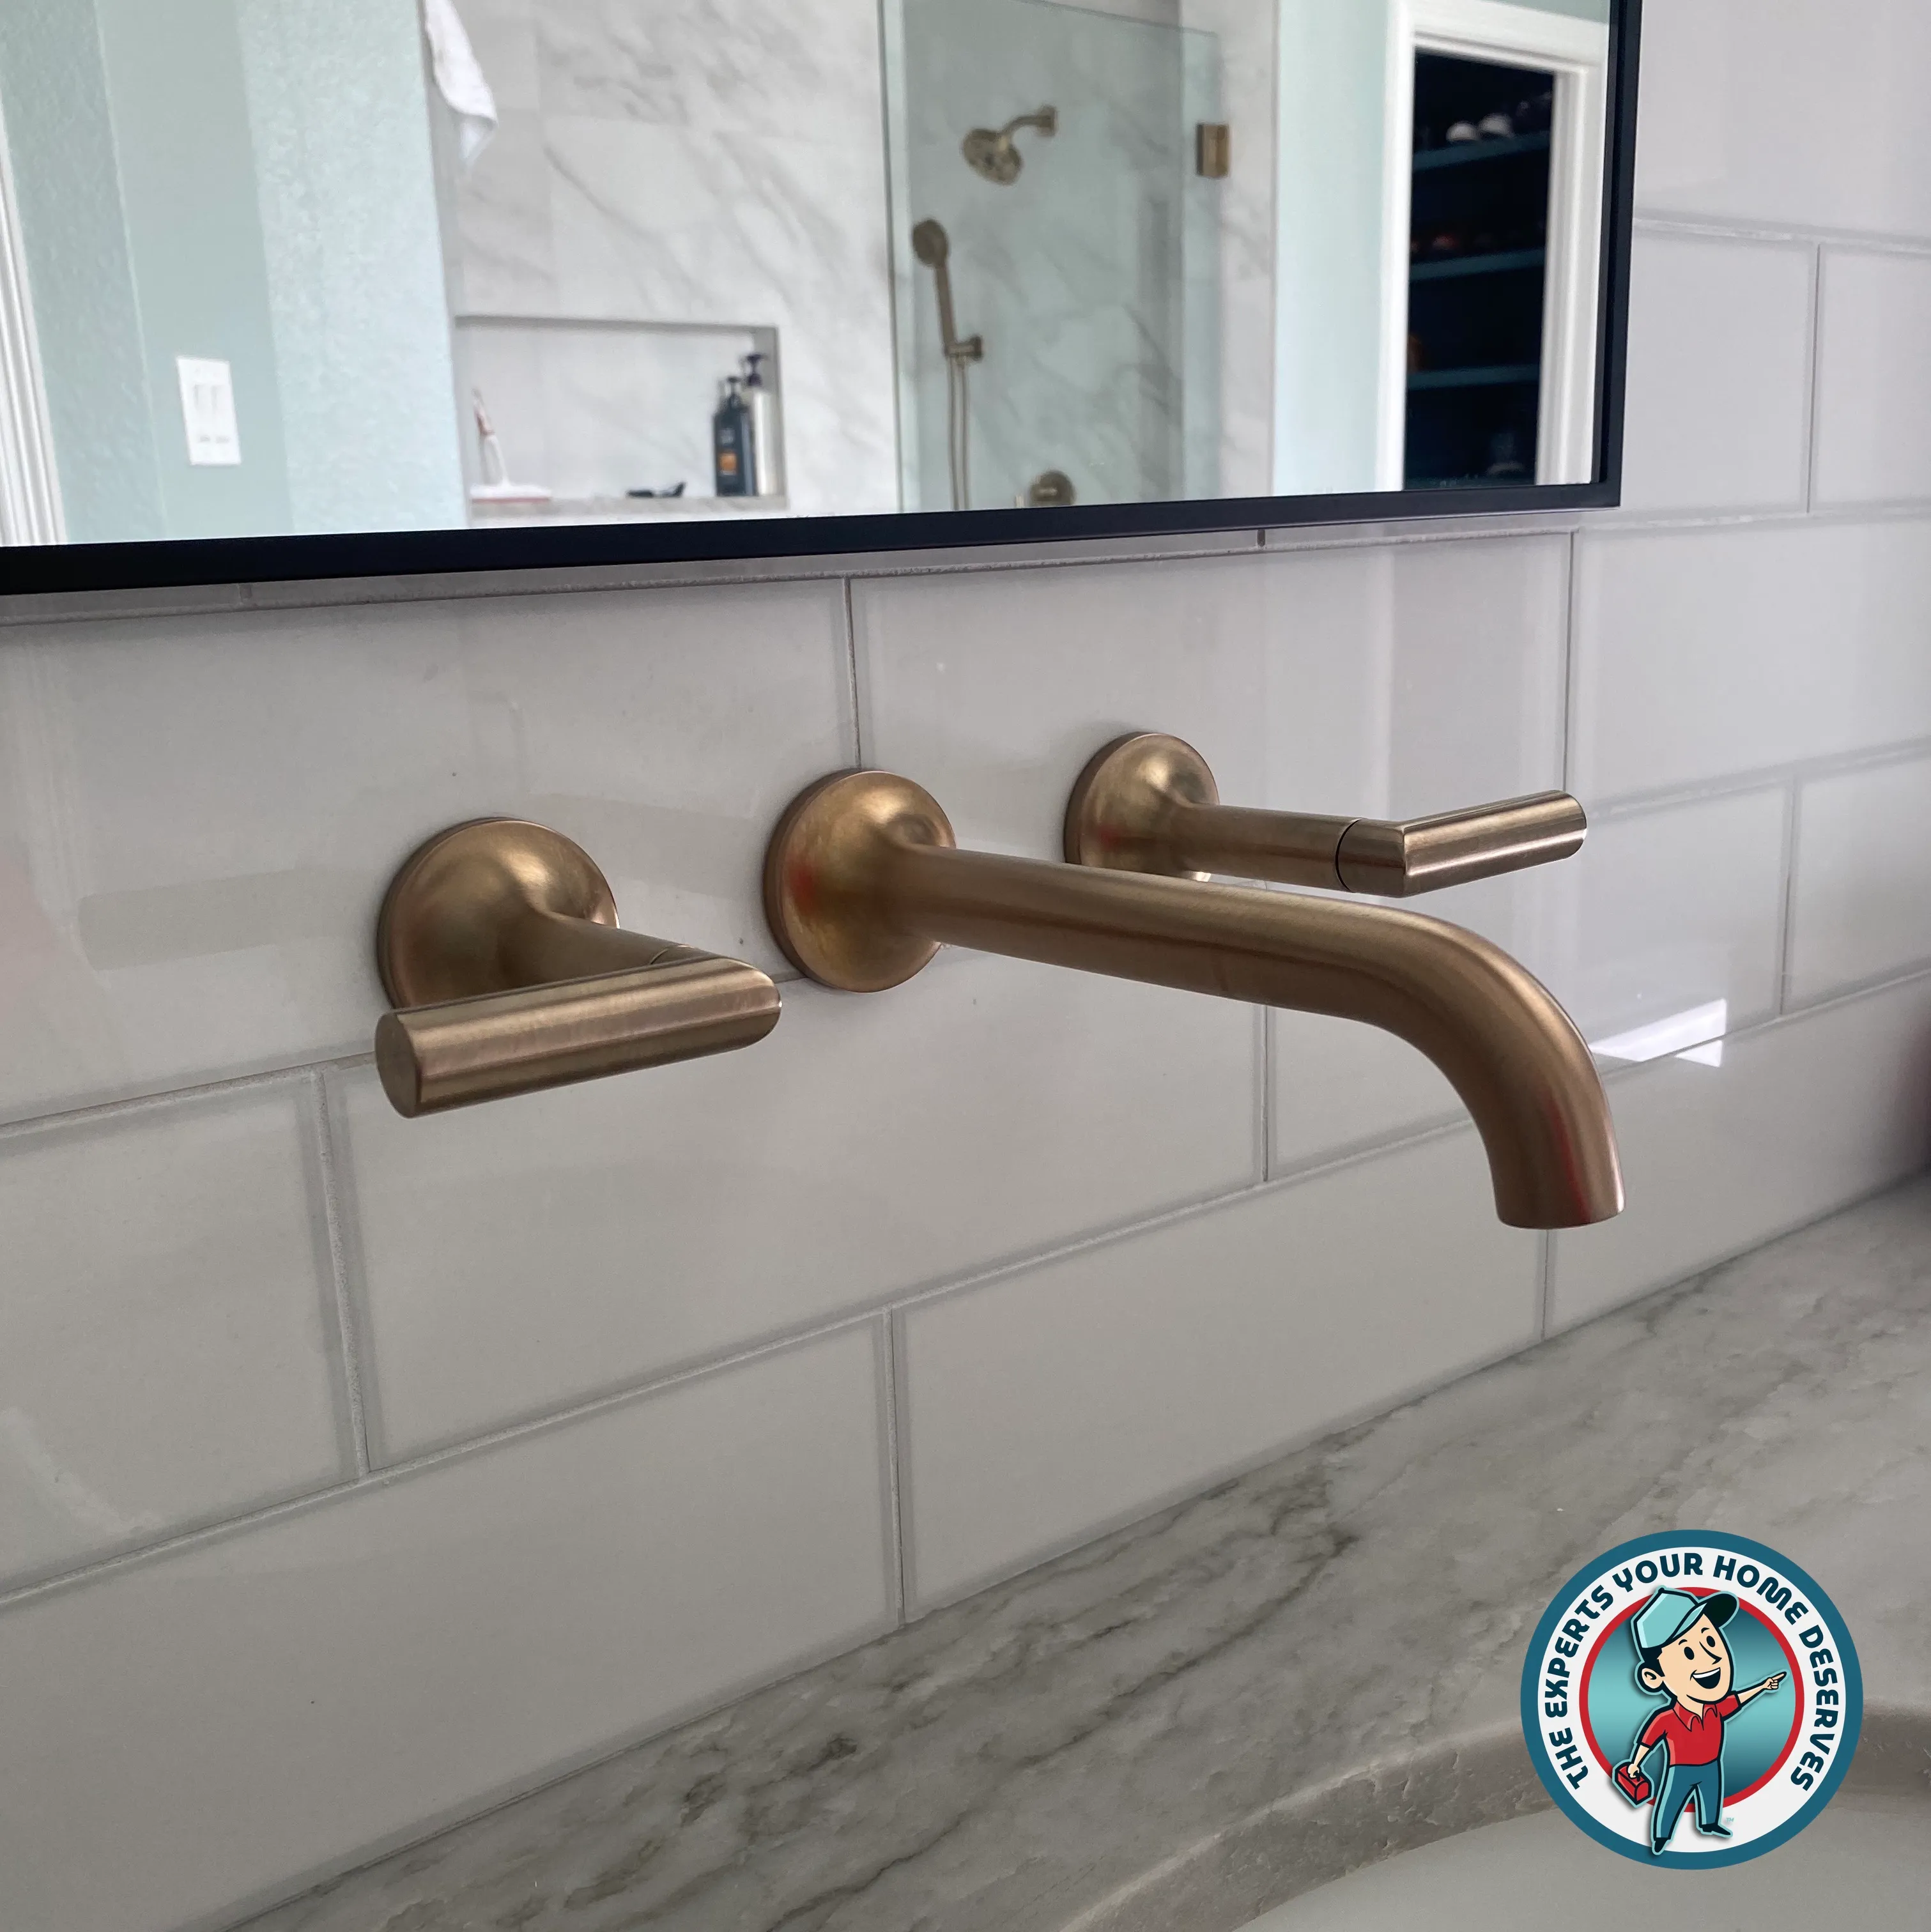 Lavatory faucet installed by red one plumbers